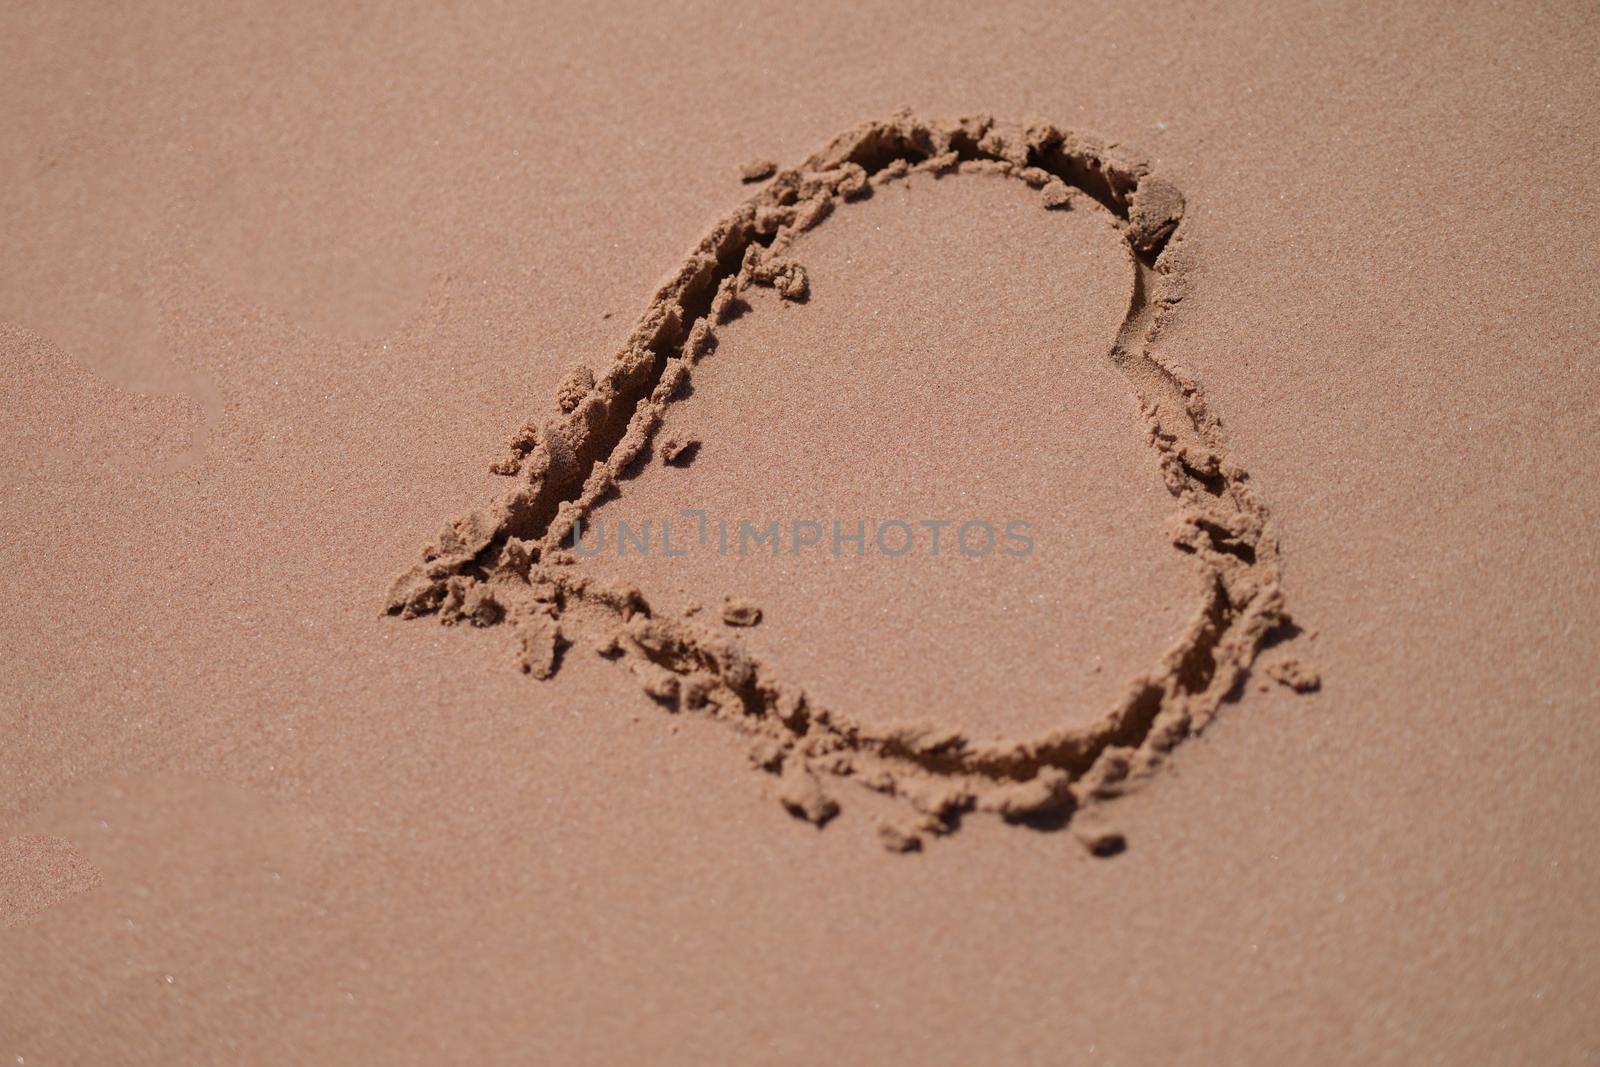 Drawn heart on wet sand on beach by kuprevich